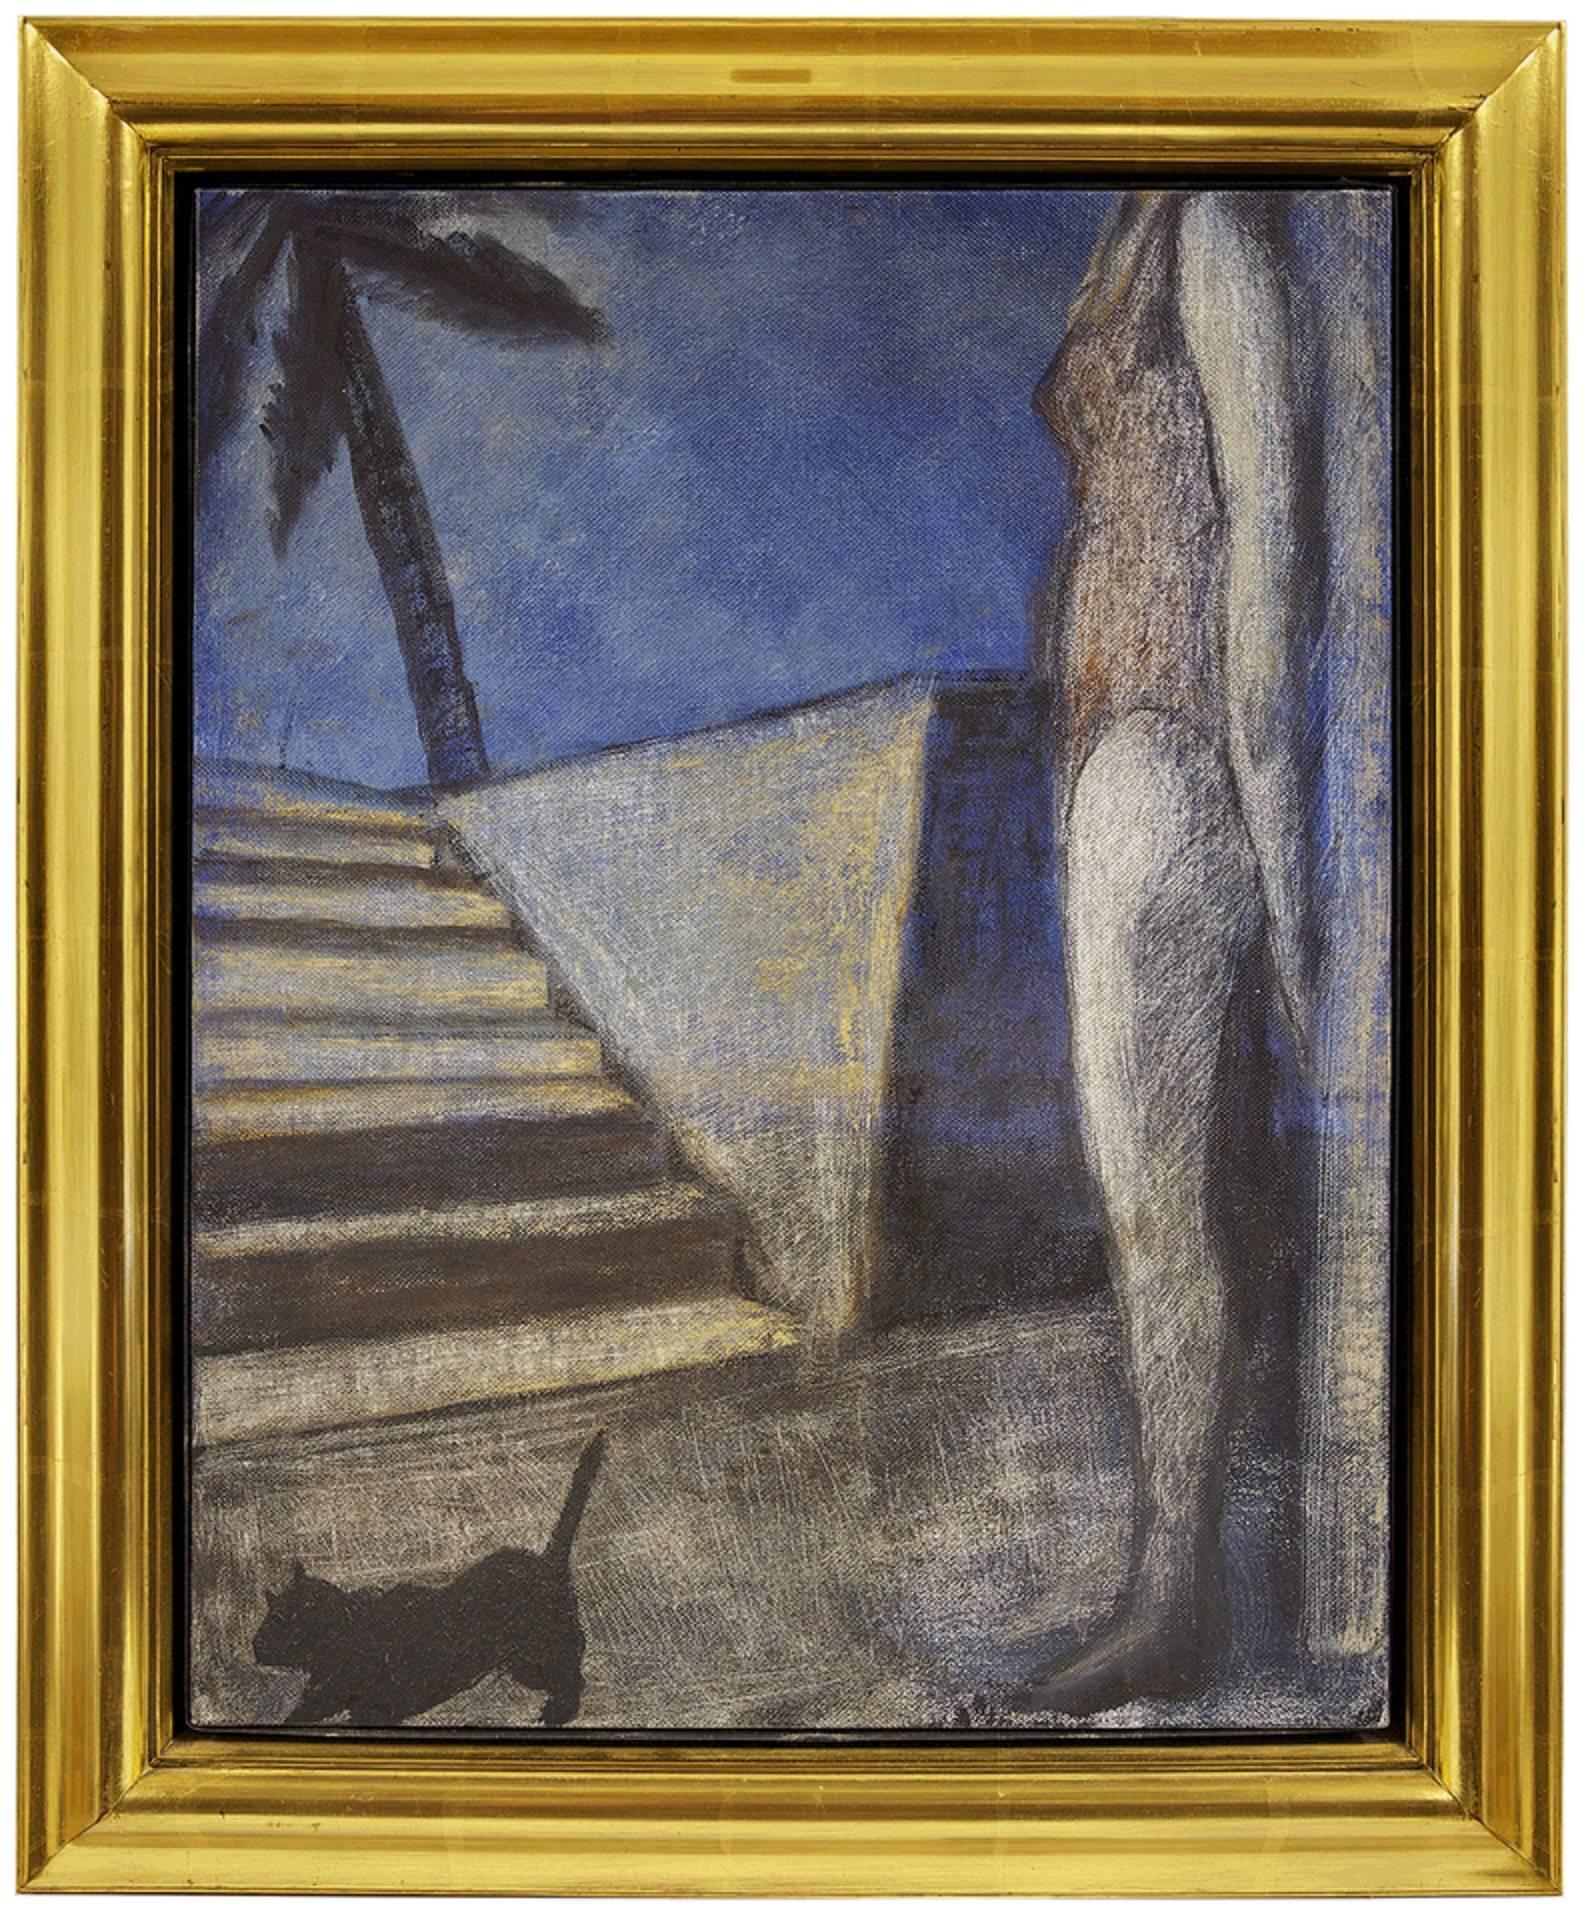 Unknown Figurative Painting - Modernist Woman with Cat (Manner of R.B. Kitaj)